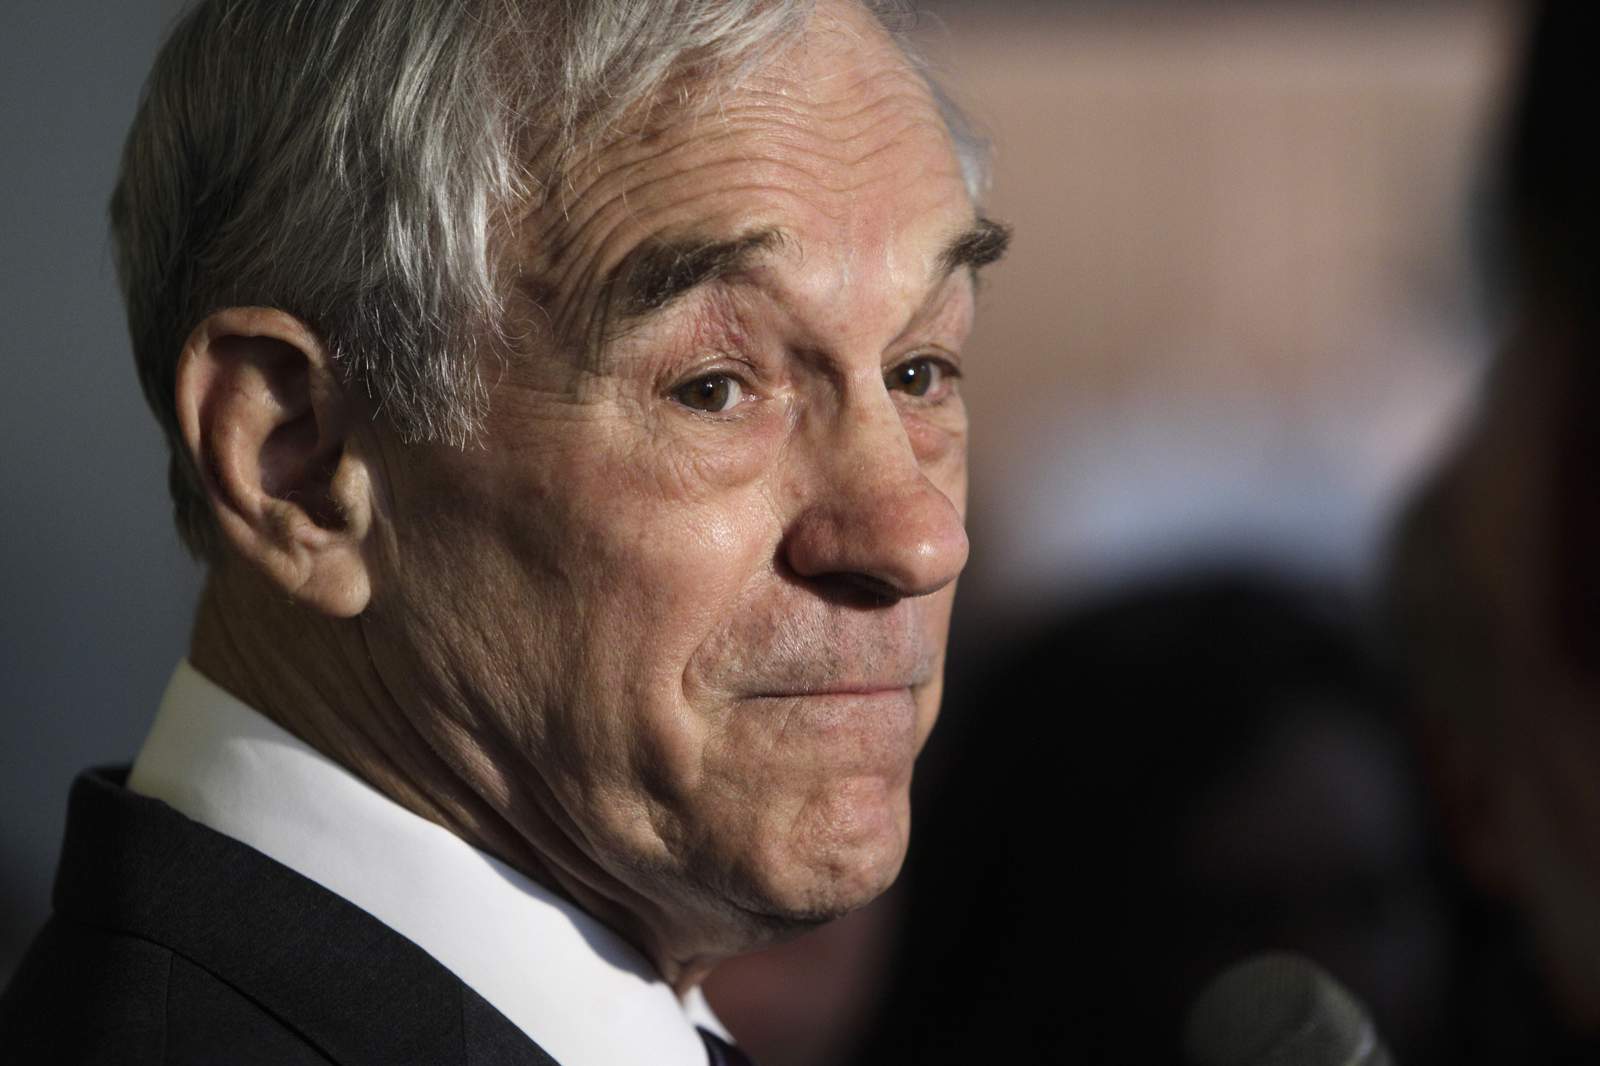 Former Texas Congressman Ron Paul hospitalized after suffering medical emergency during livestream